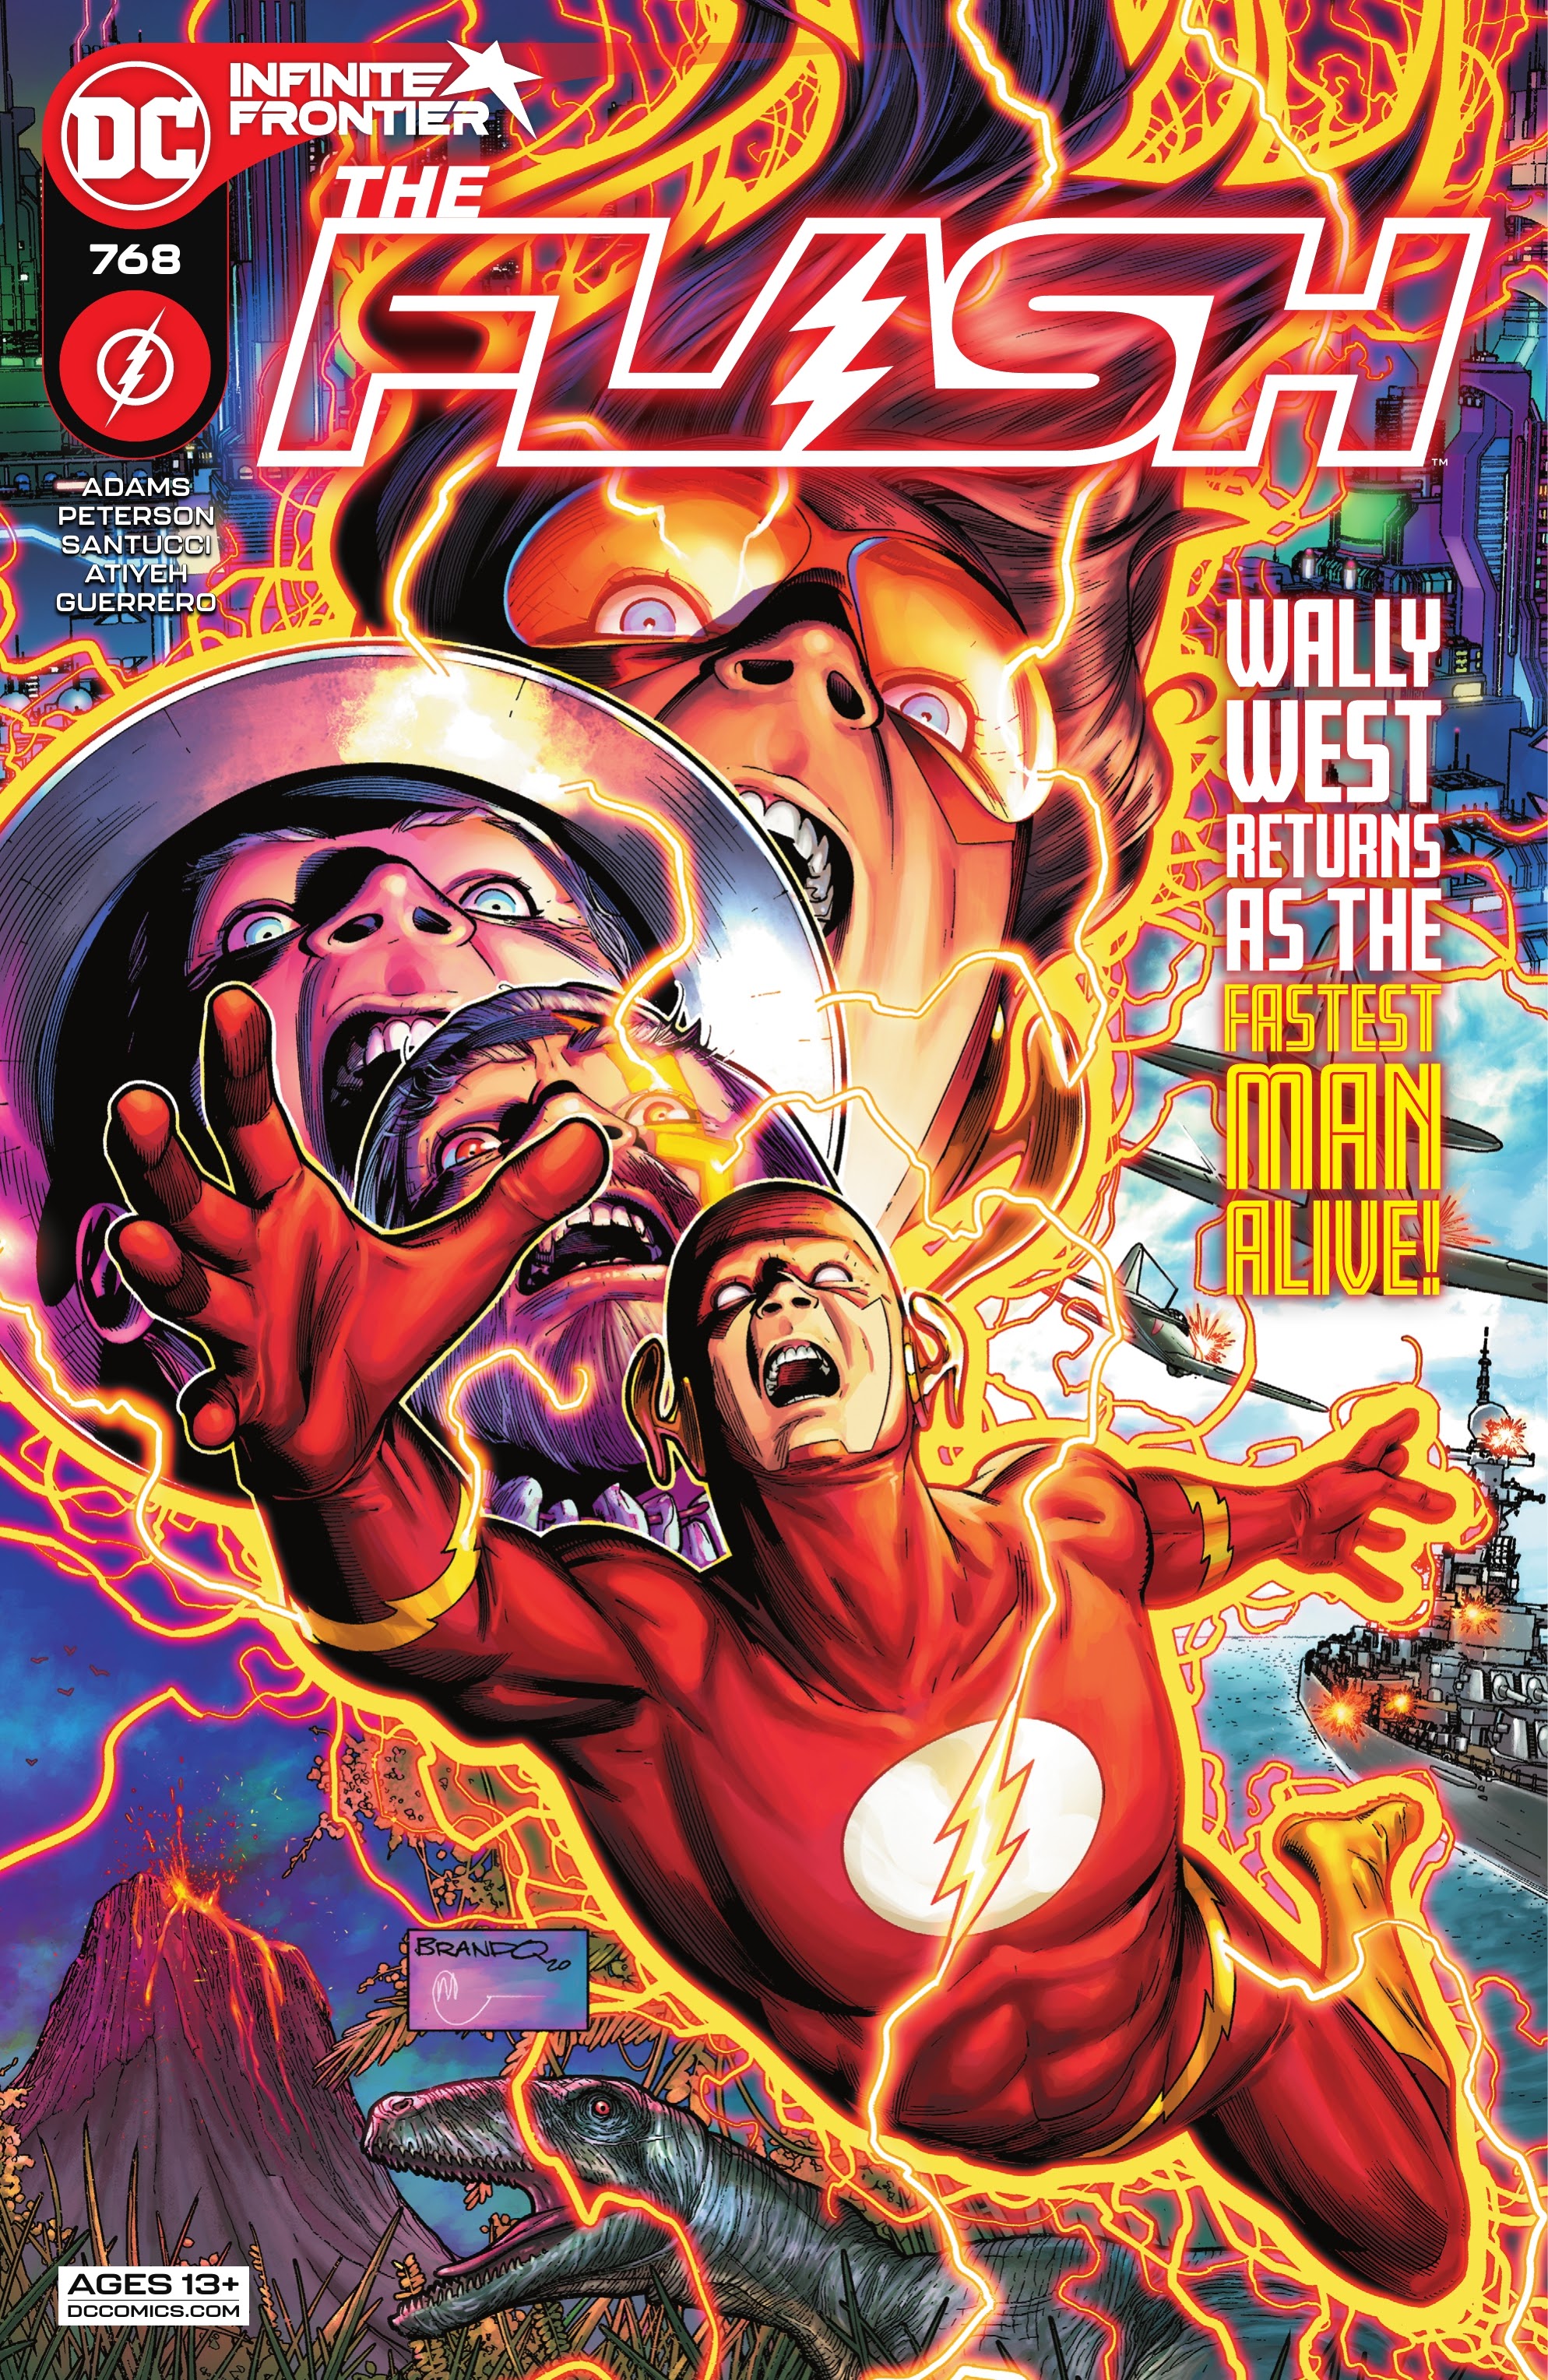 Read online The Flash (2016) comic -  Issue #768 - 1